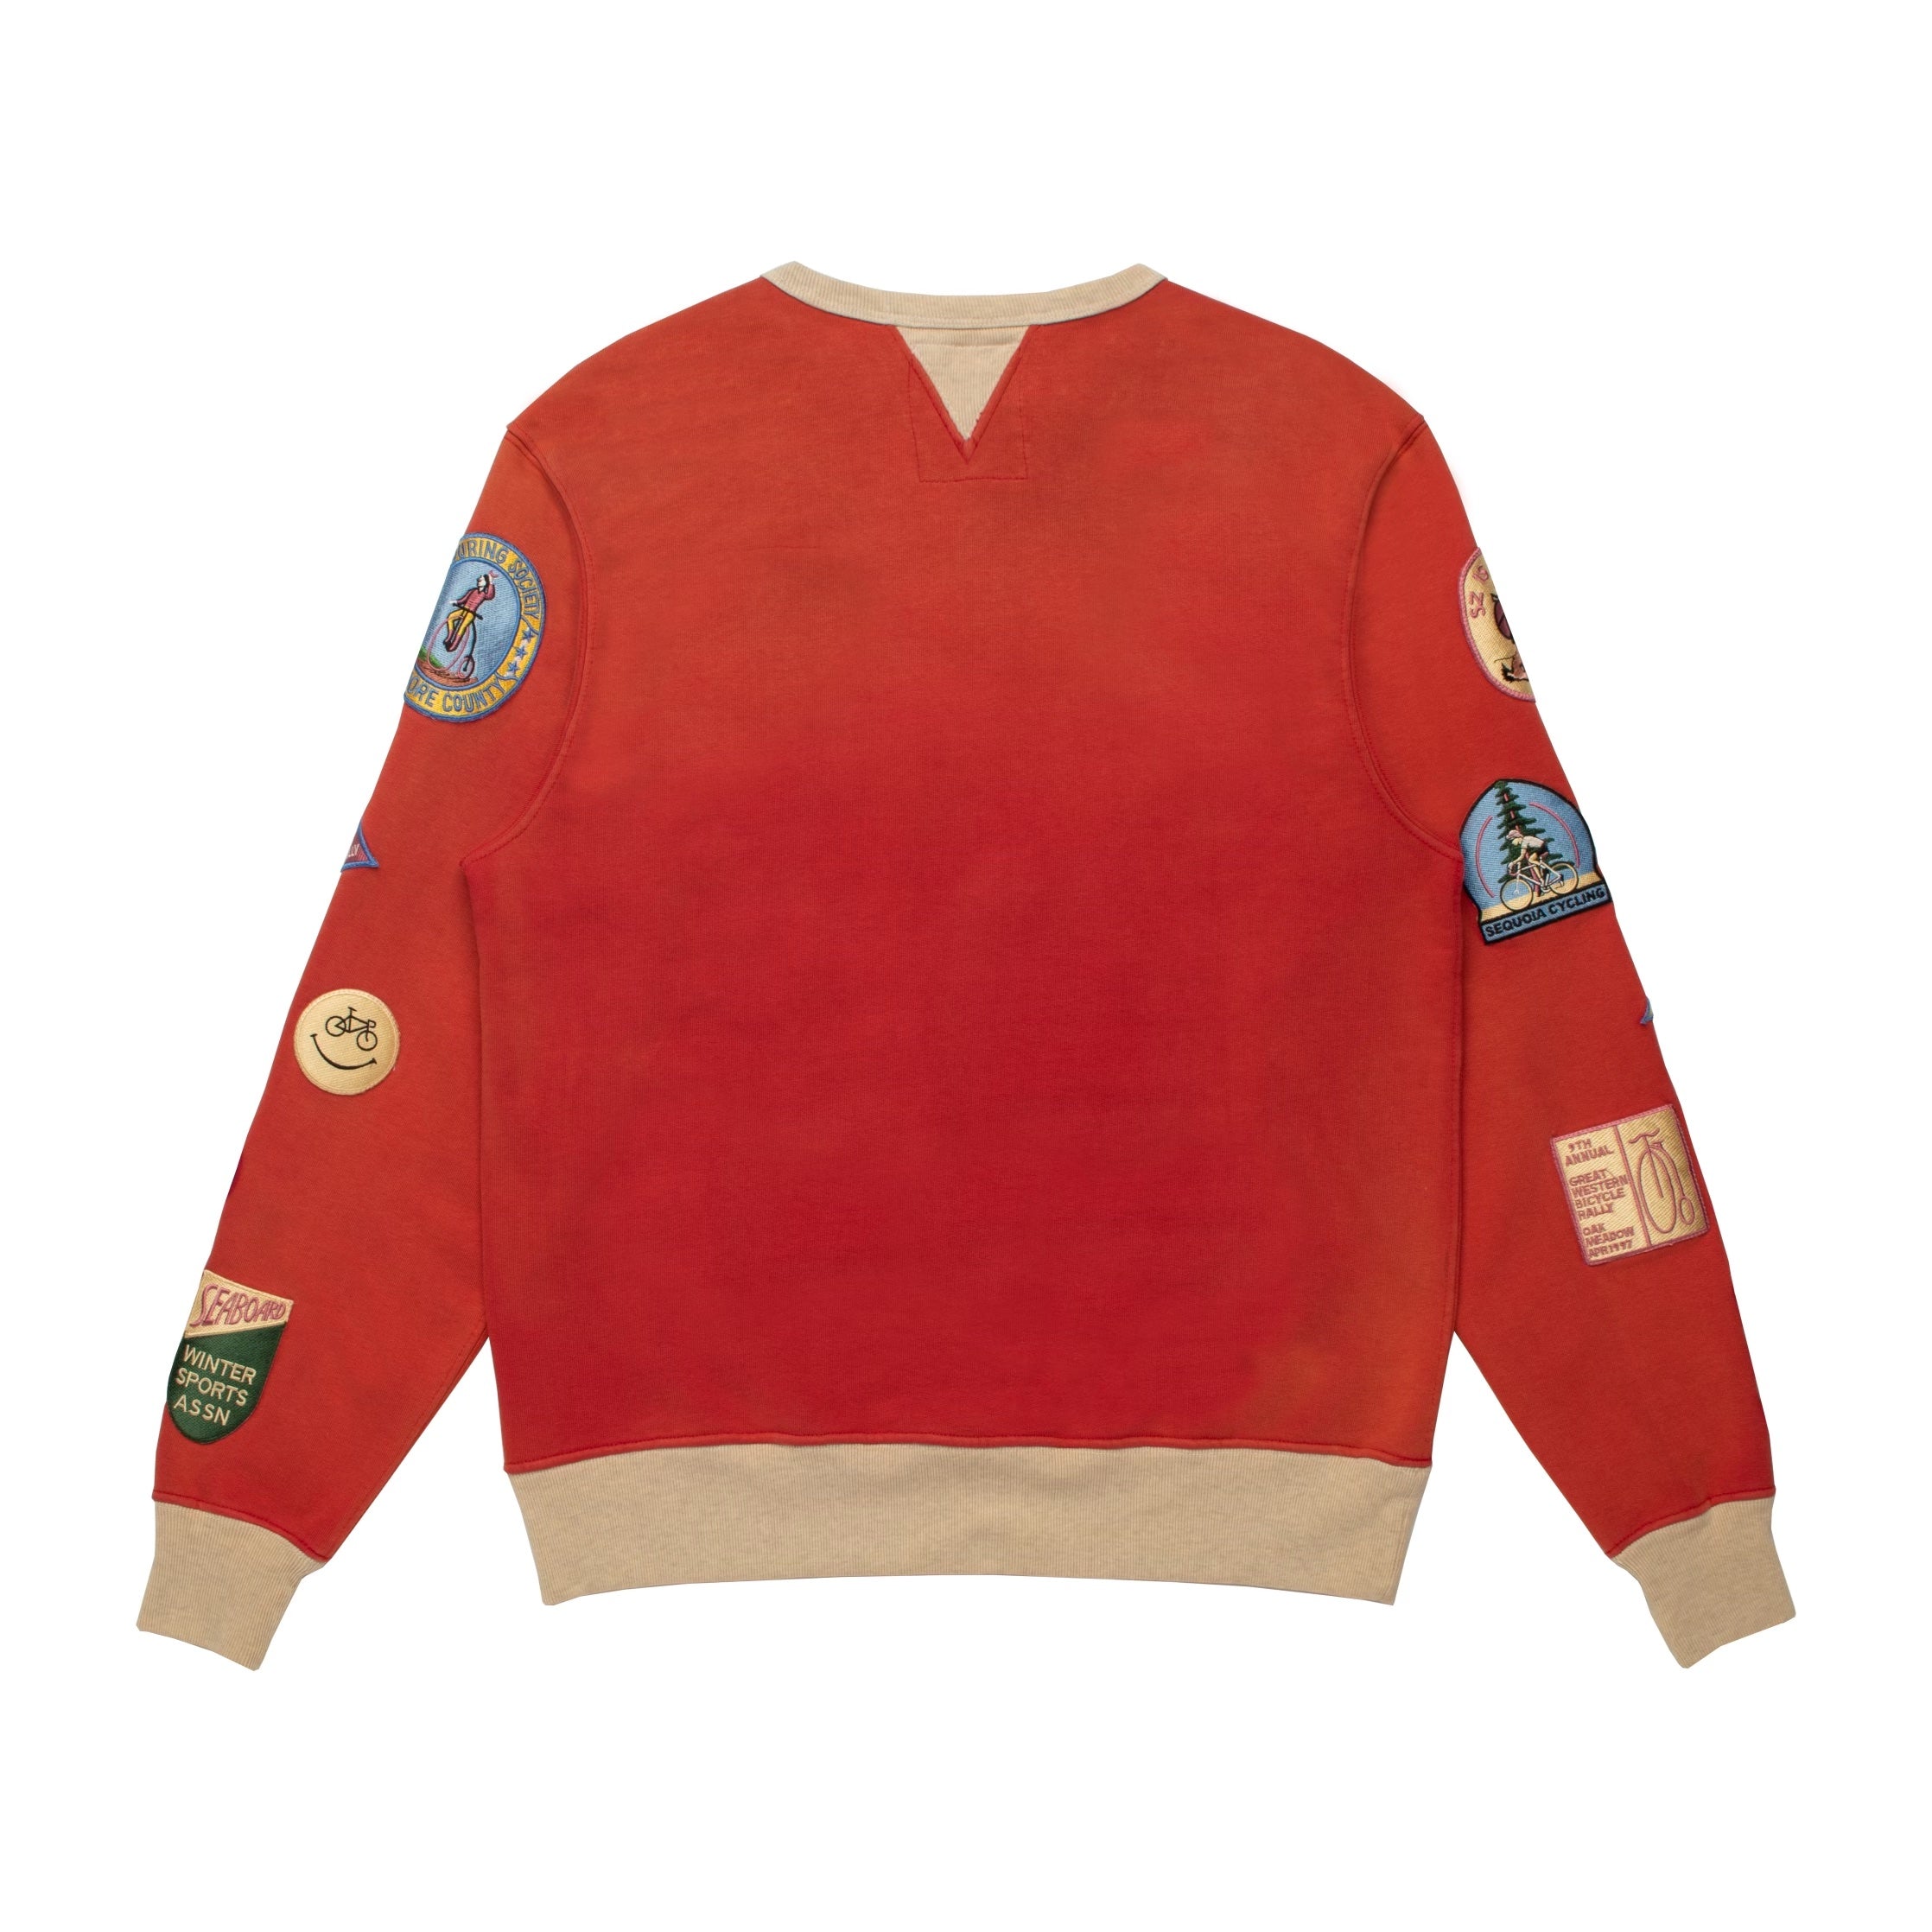 samuel zelig / Sycamore Cycling Crewneck - RED